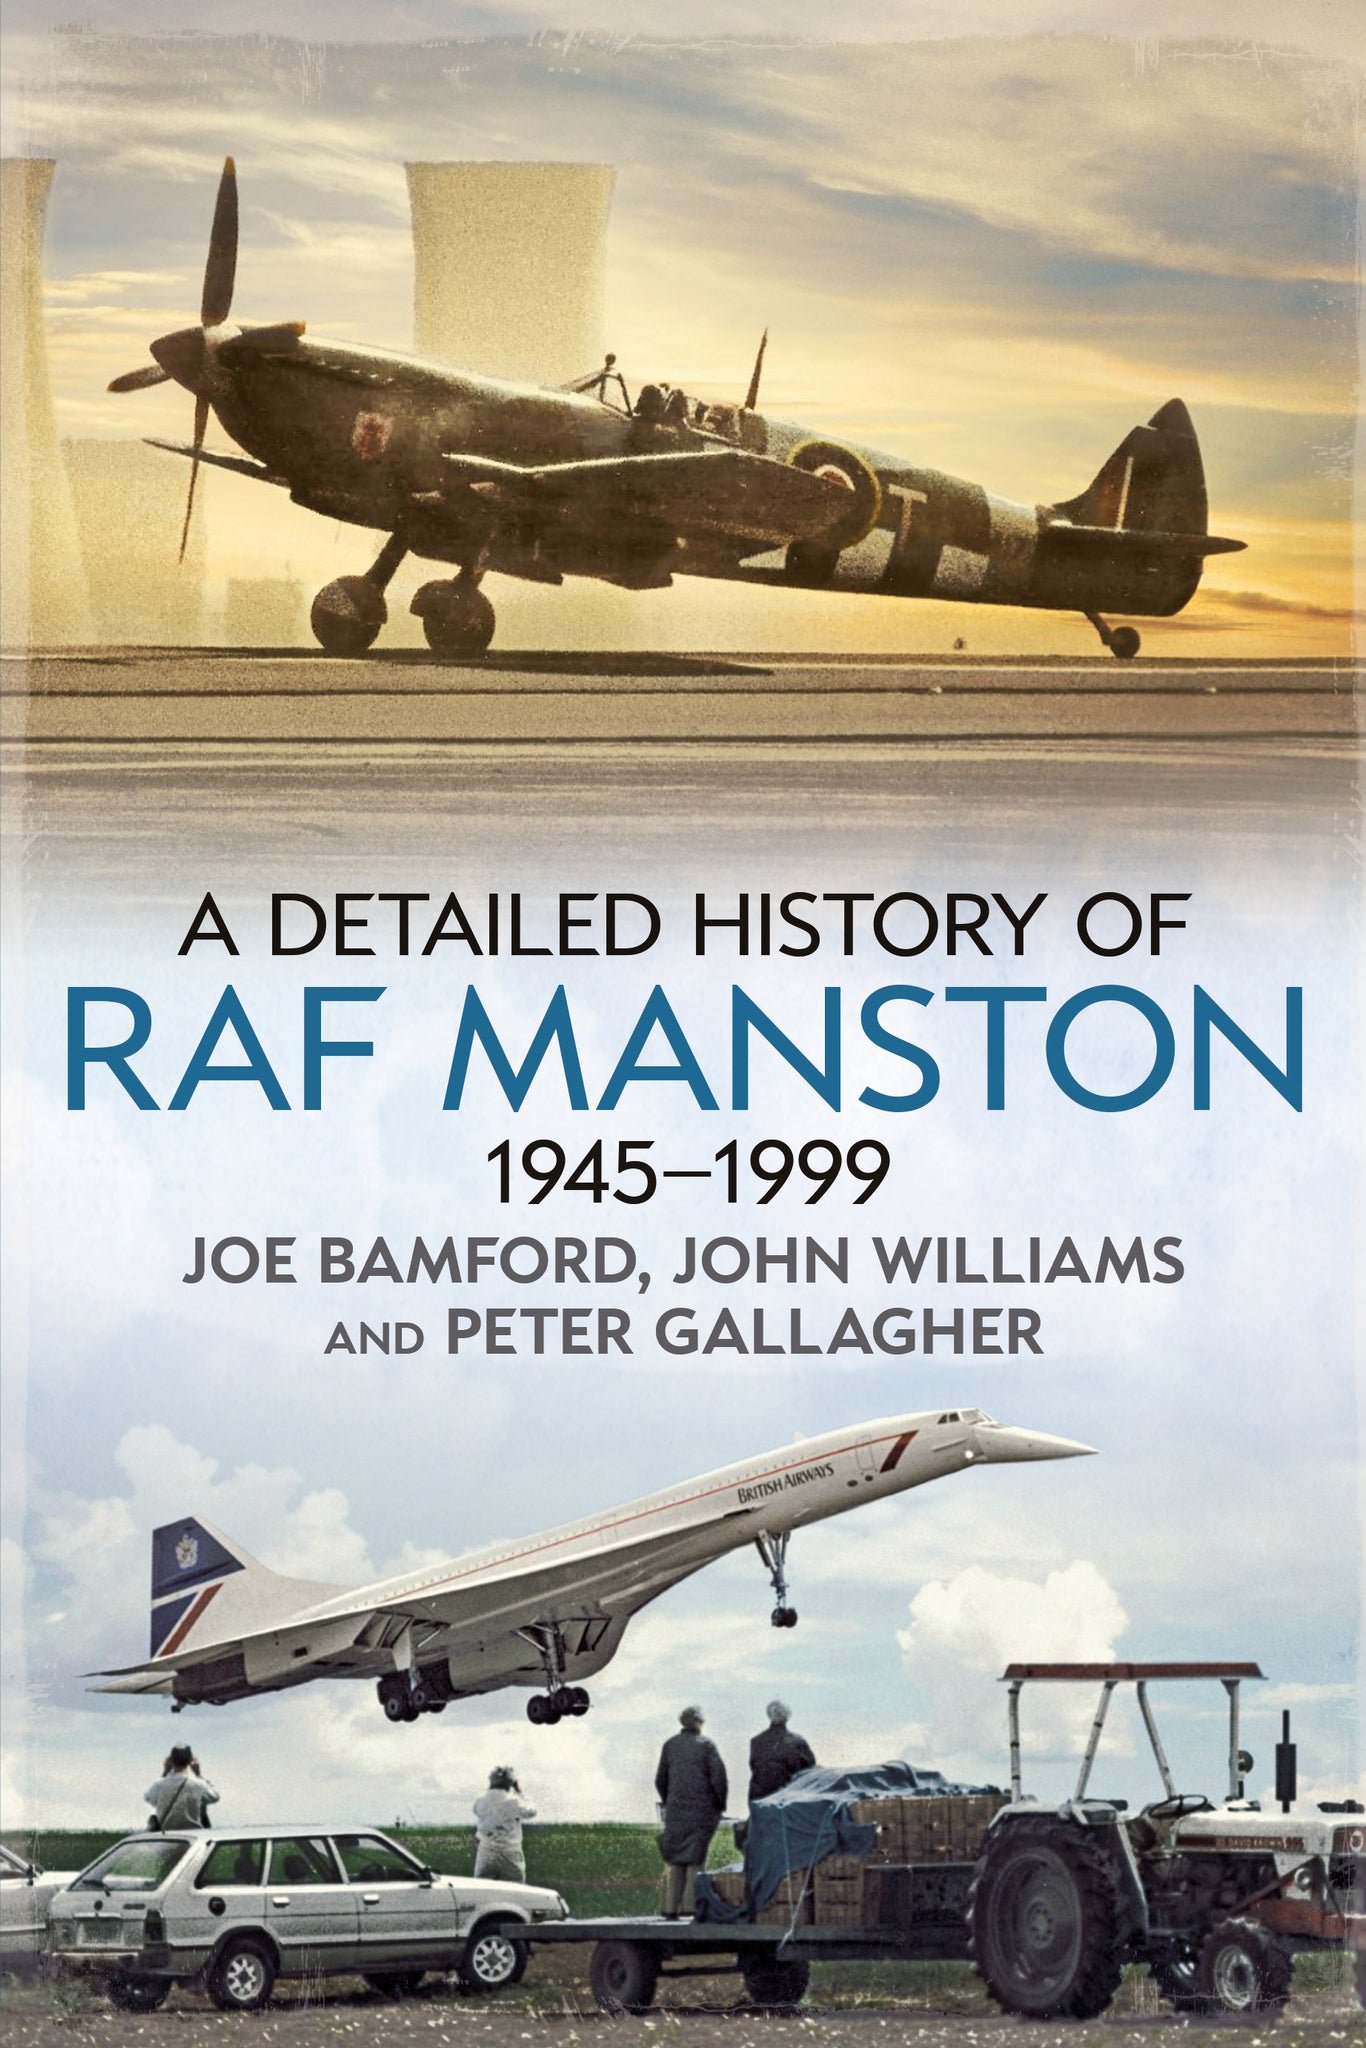 A Detailed History of RAF Manston 1945-1999